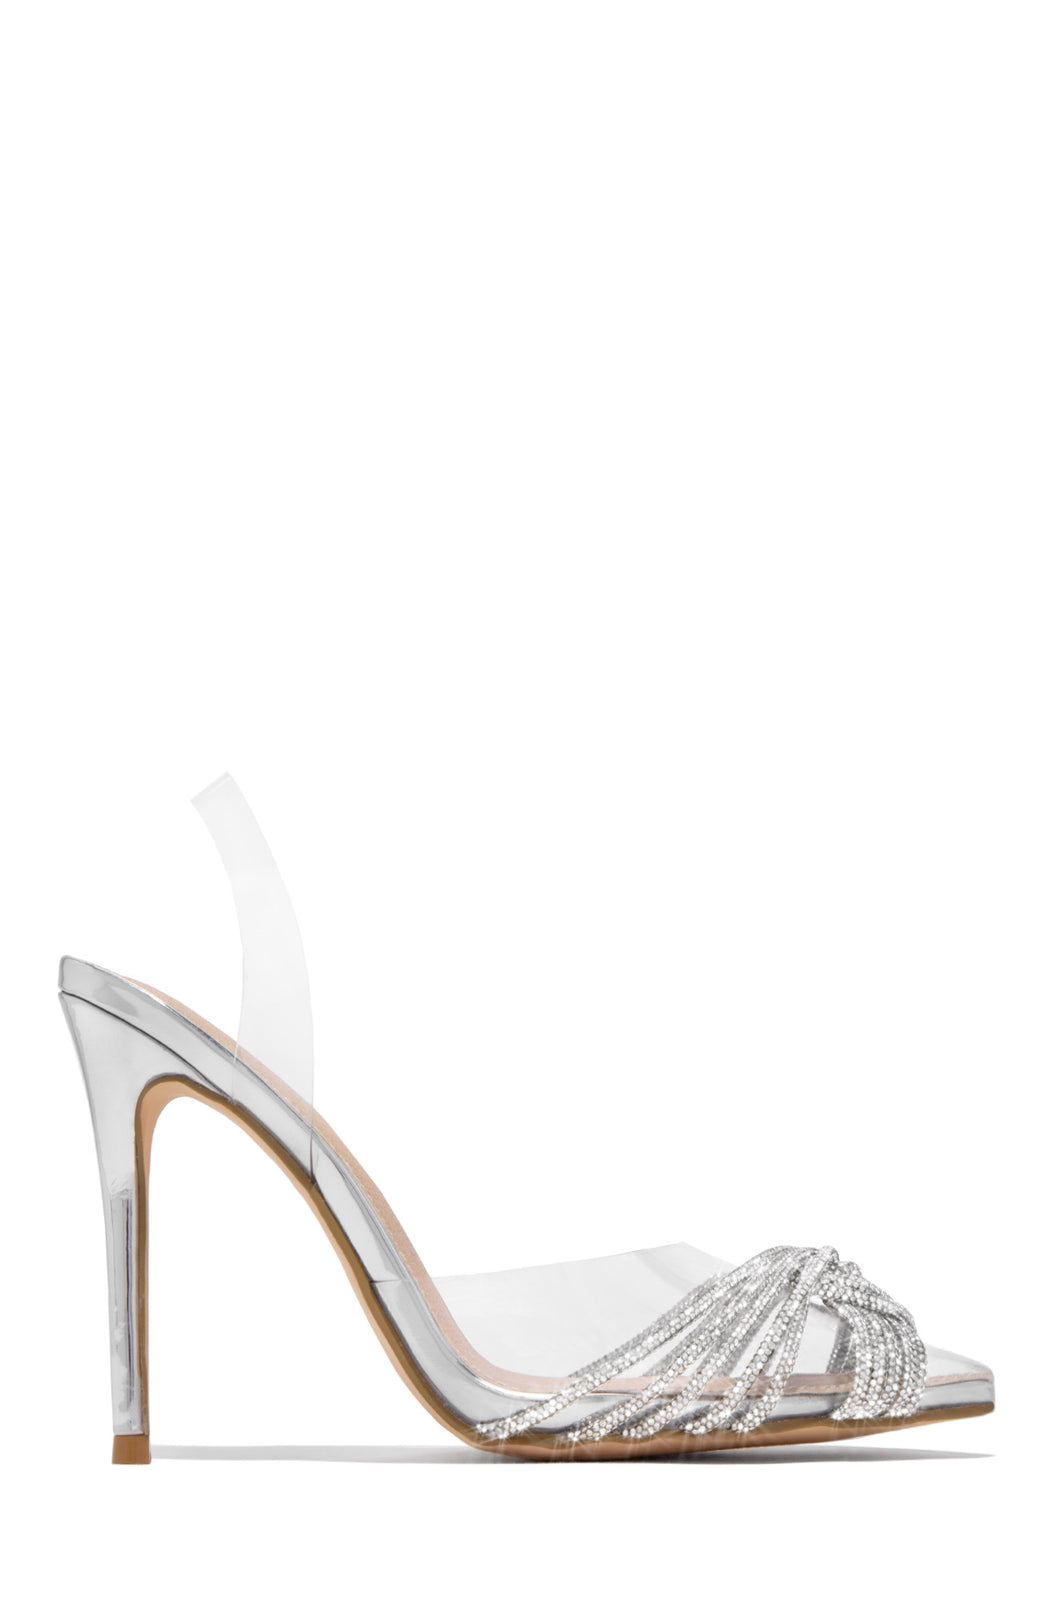 Miss Lola | Silver Embellished Pointed Toe Pumps – MISS LOLA